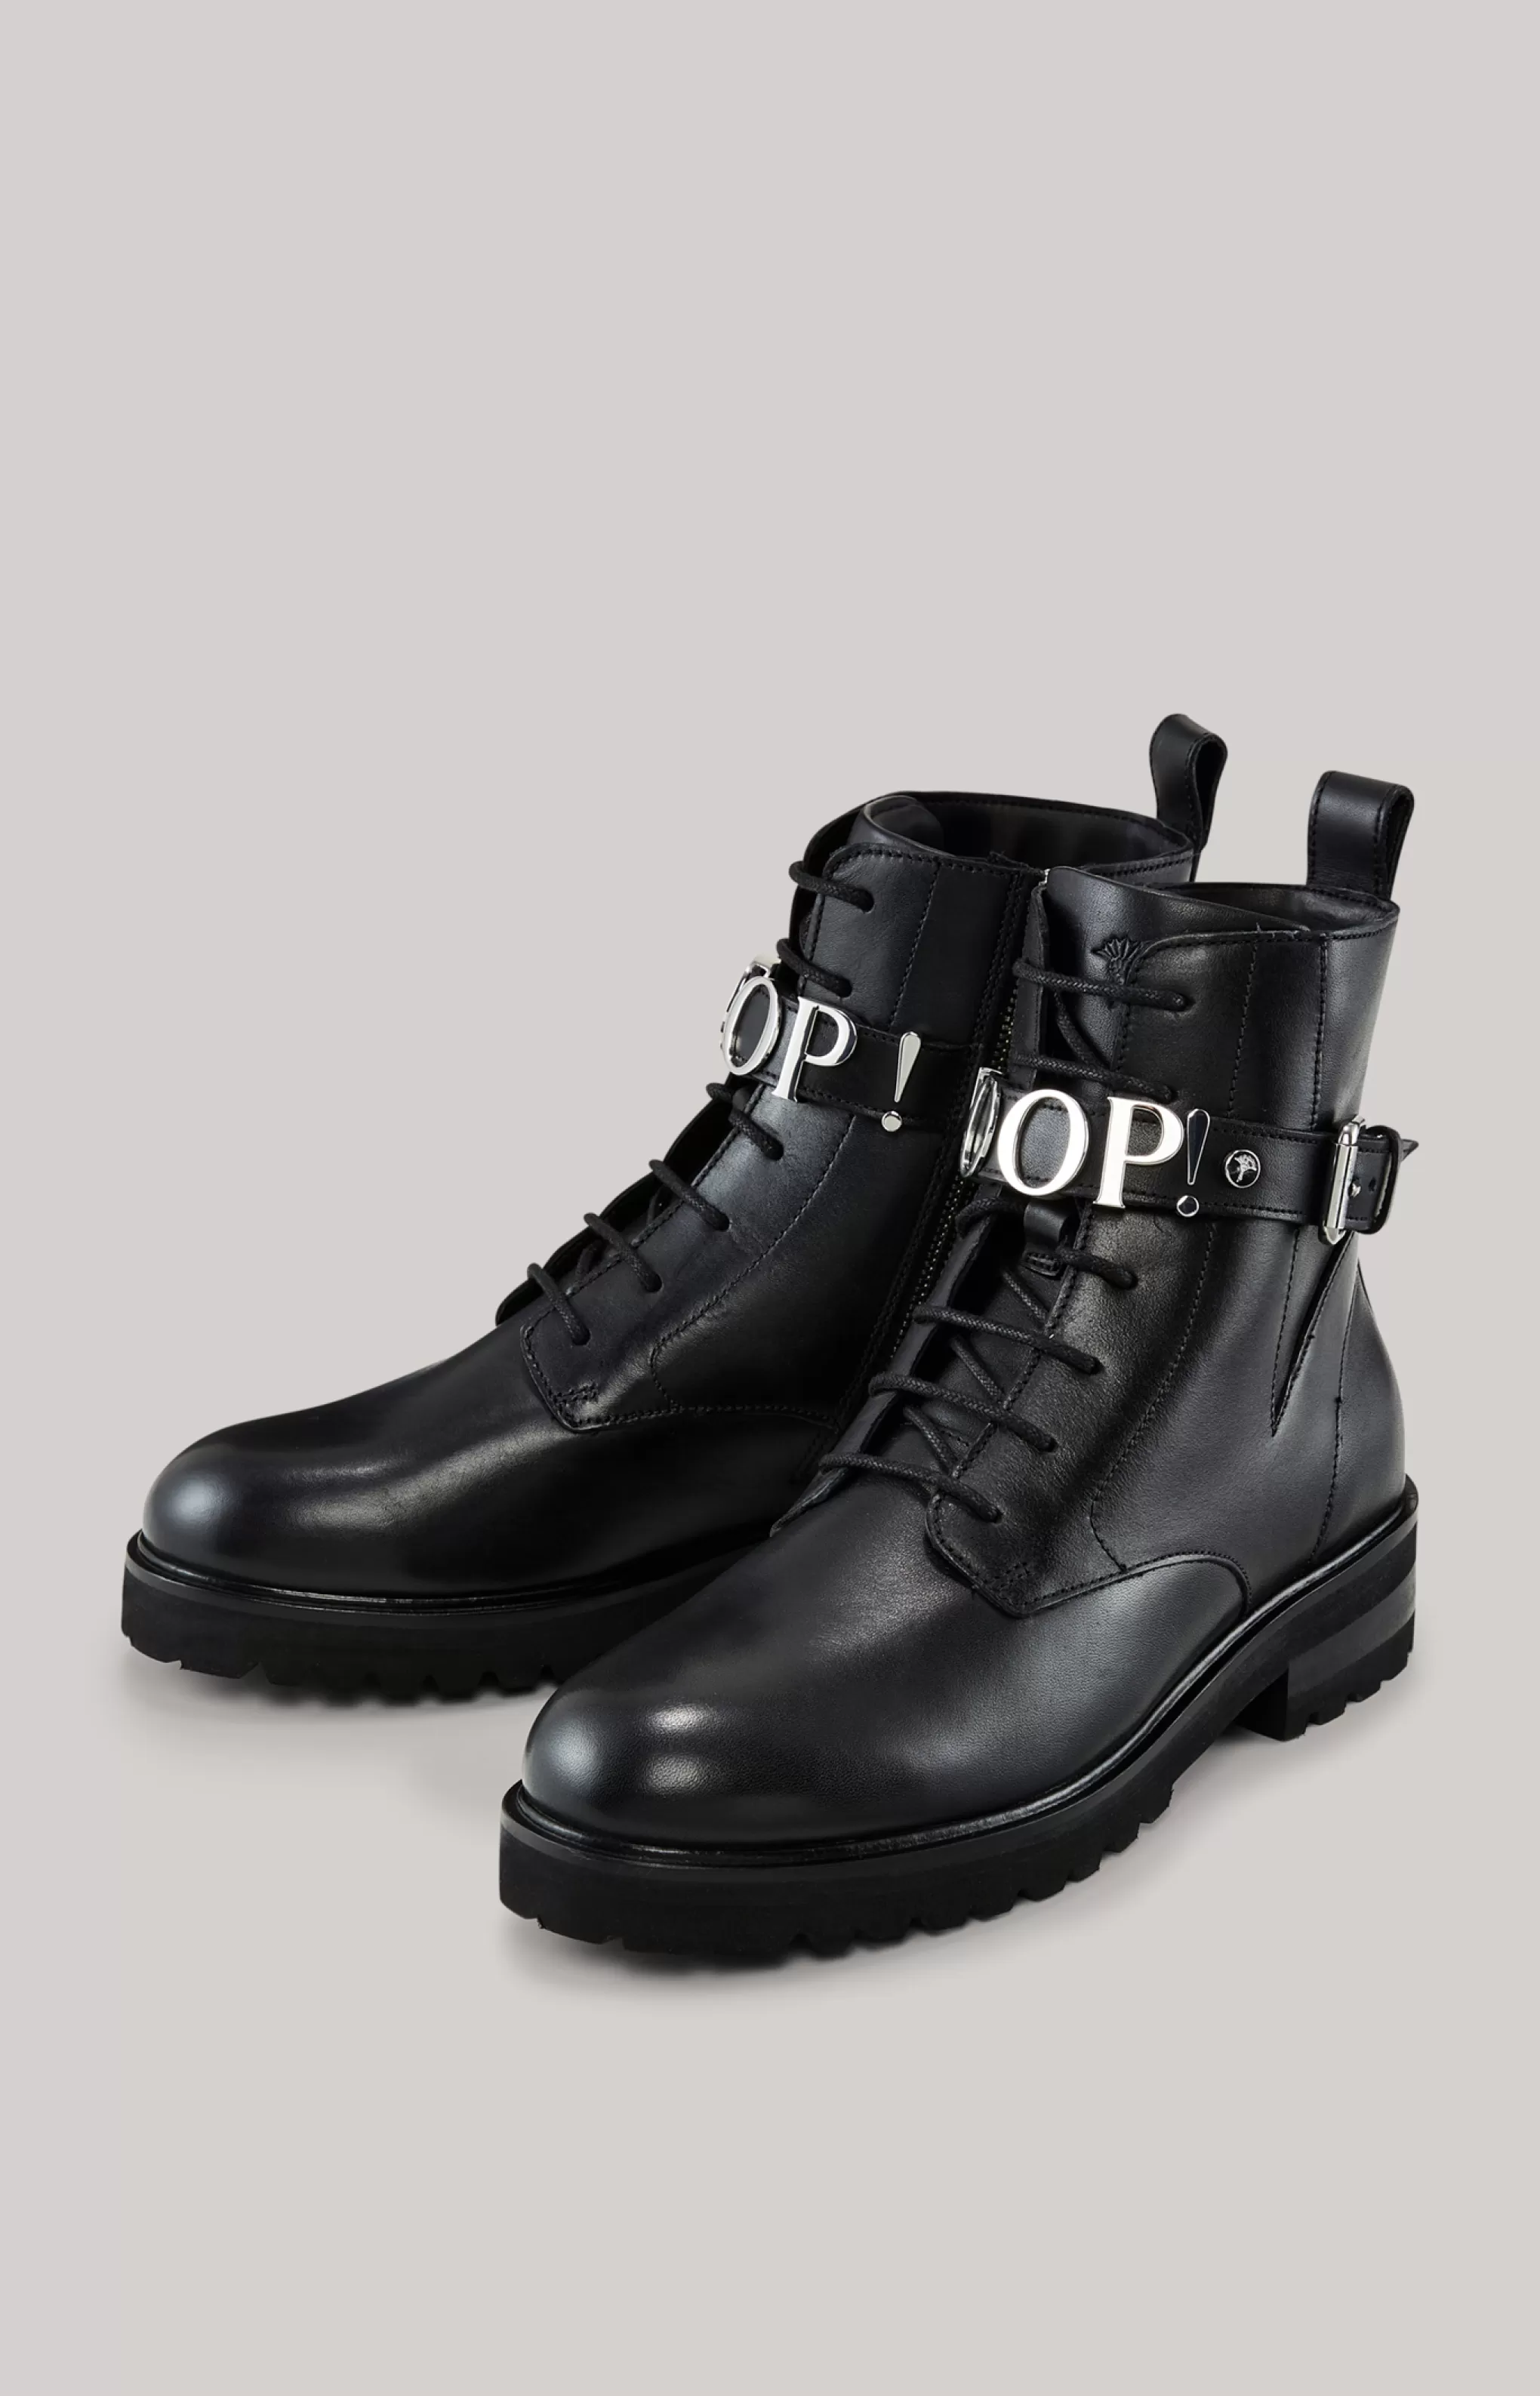 Shoes*JOOP Shoes Lettera Maria Boots in